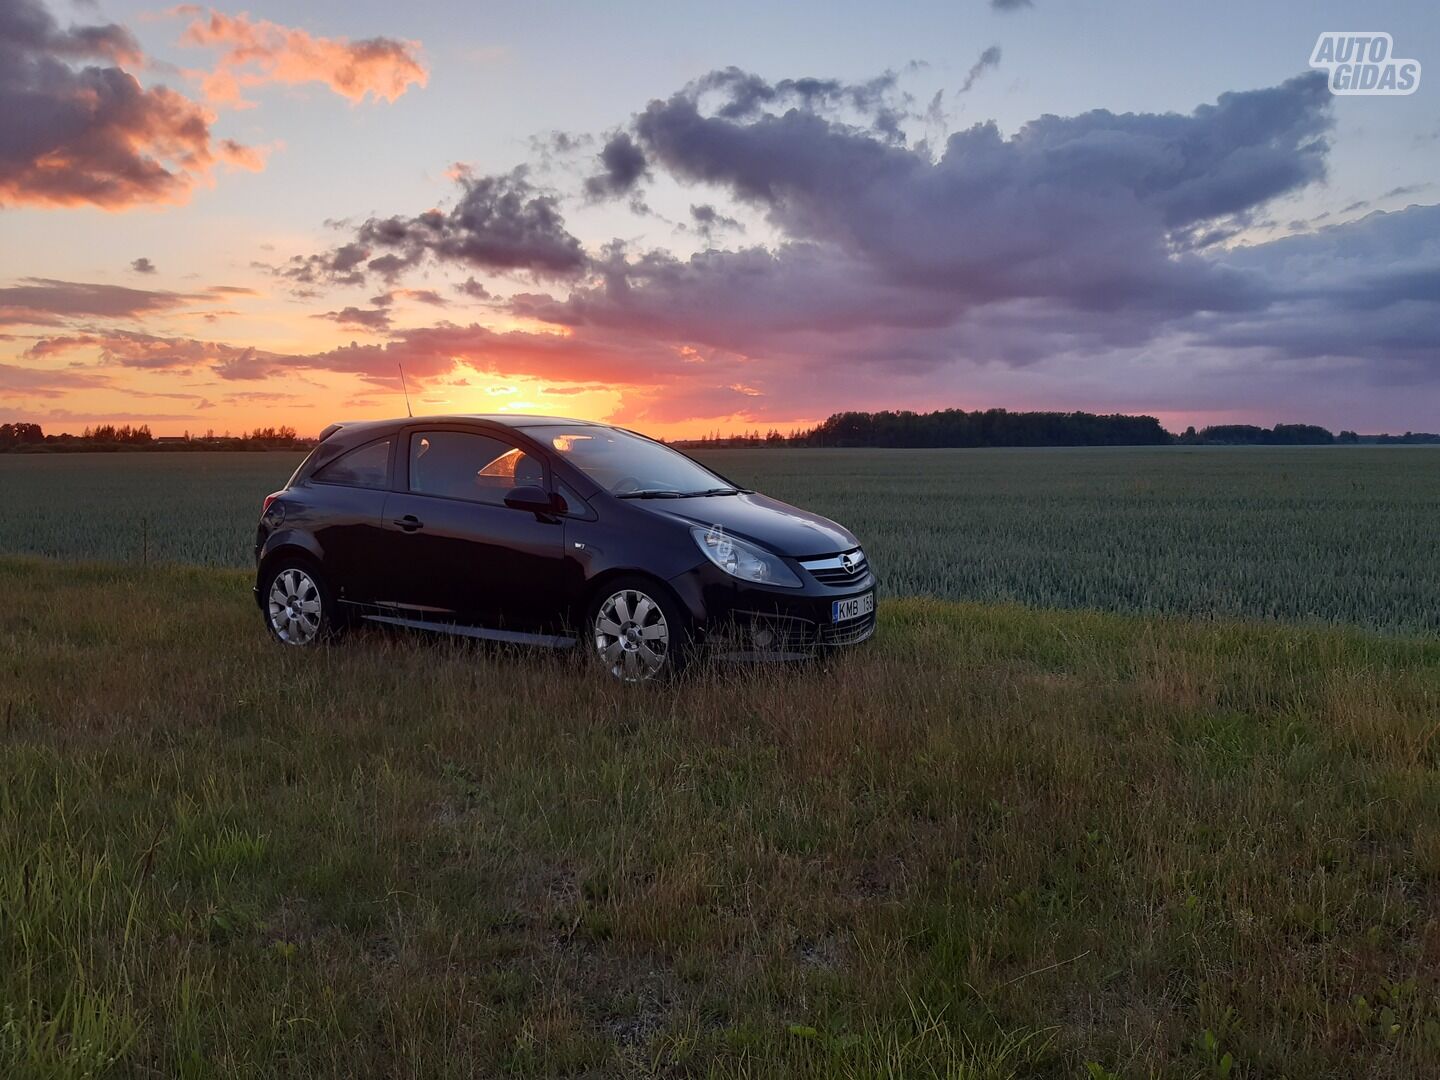 Opel Corsa 2008 y Coupe